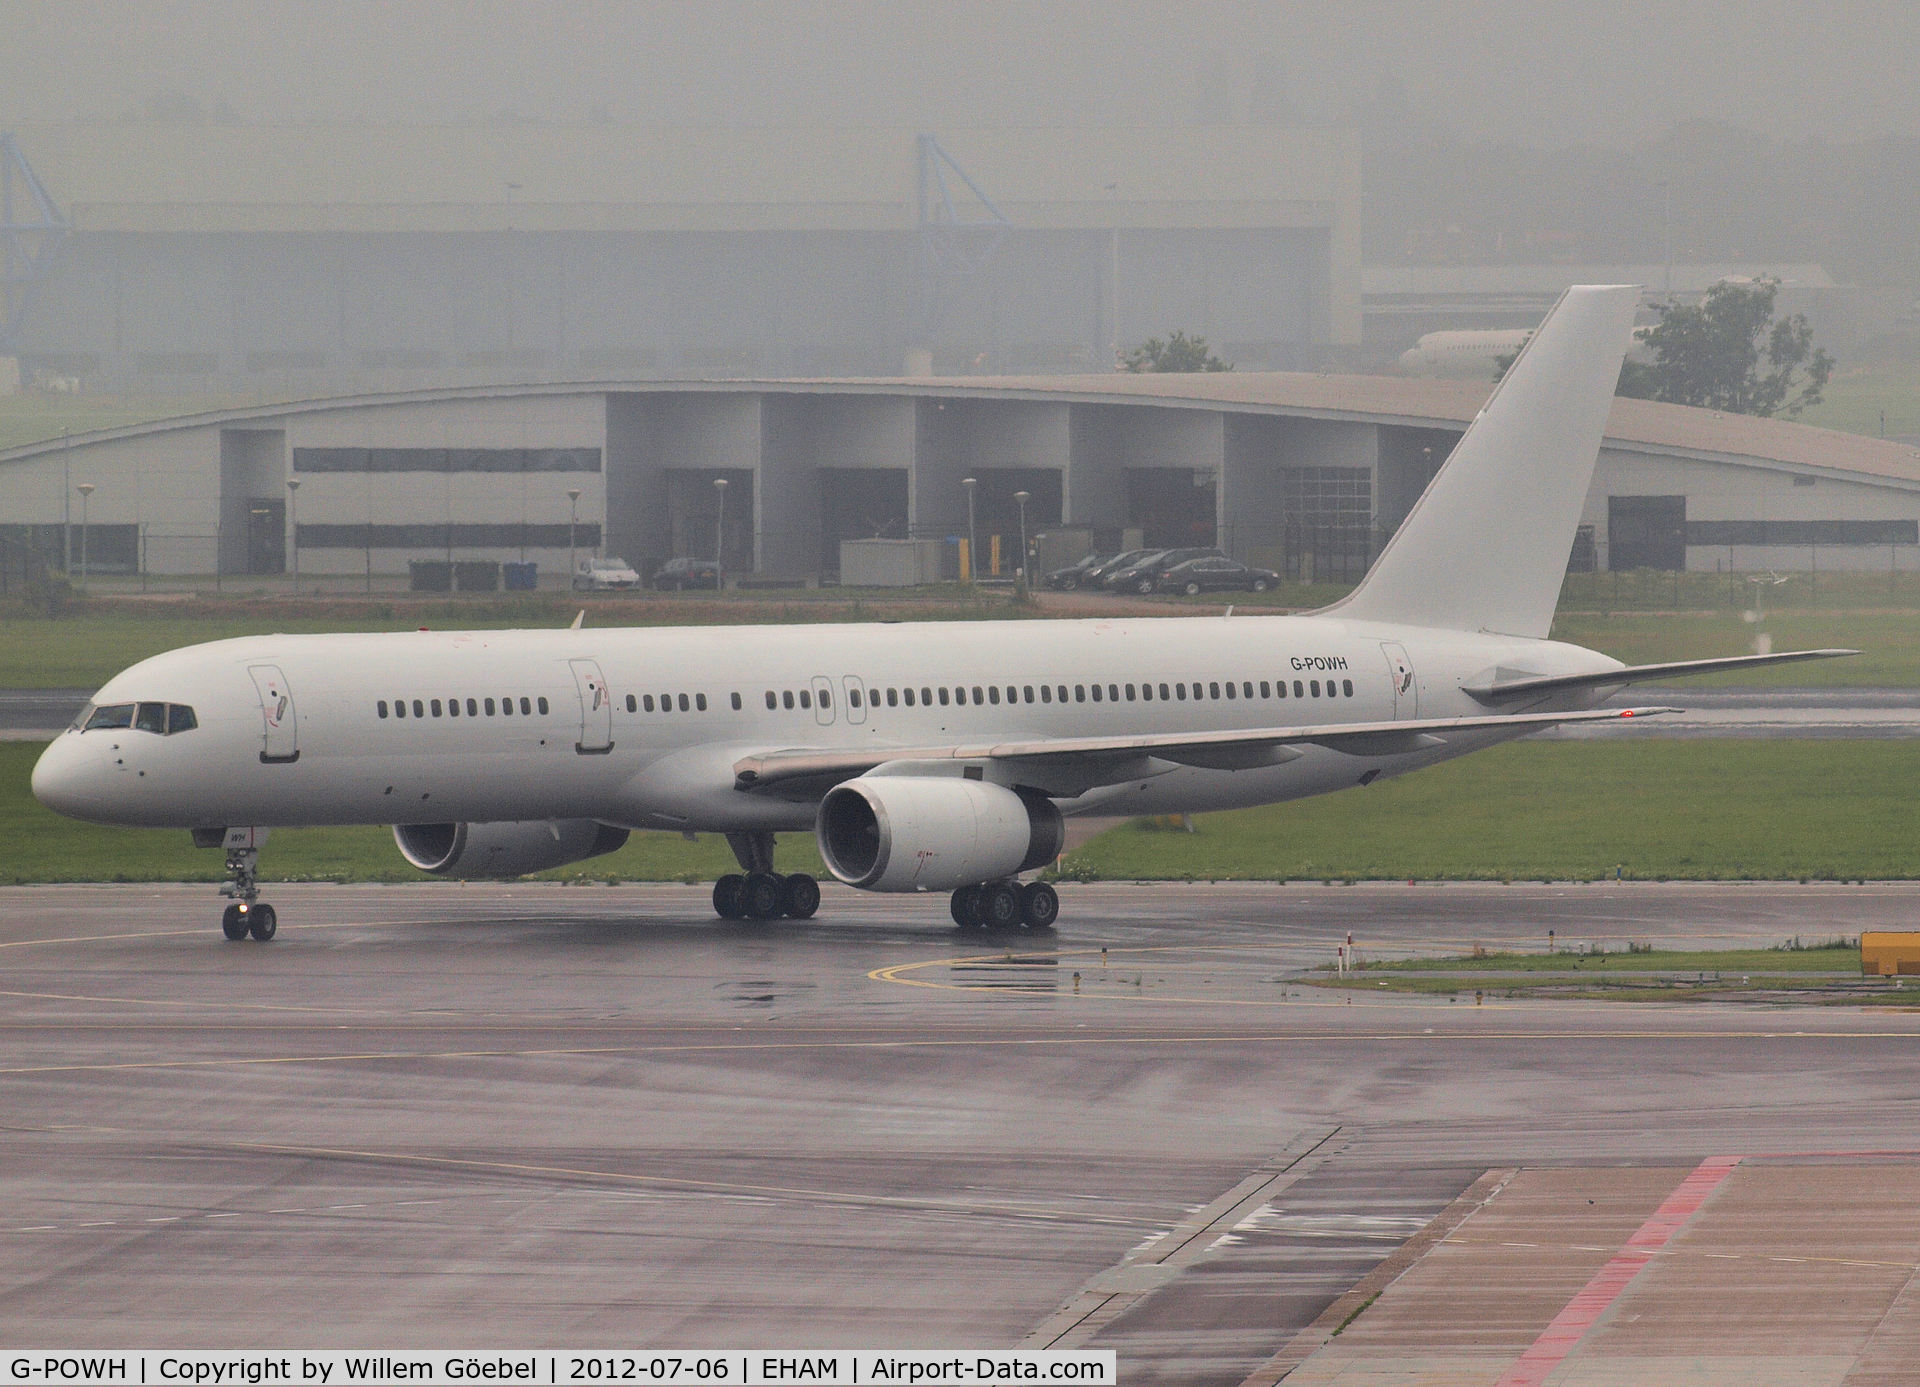 G-POWH, 2000 Boeing 757-256 C/N 29308, Taxi to the gate of Amsterdam Airport